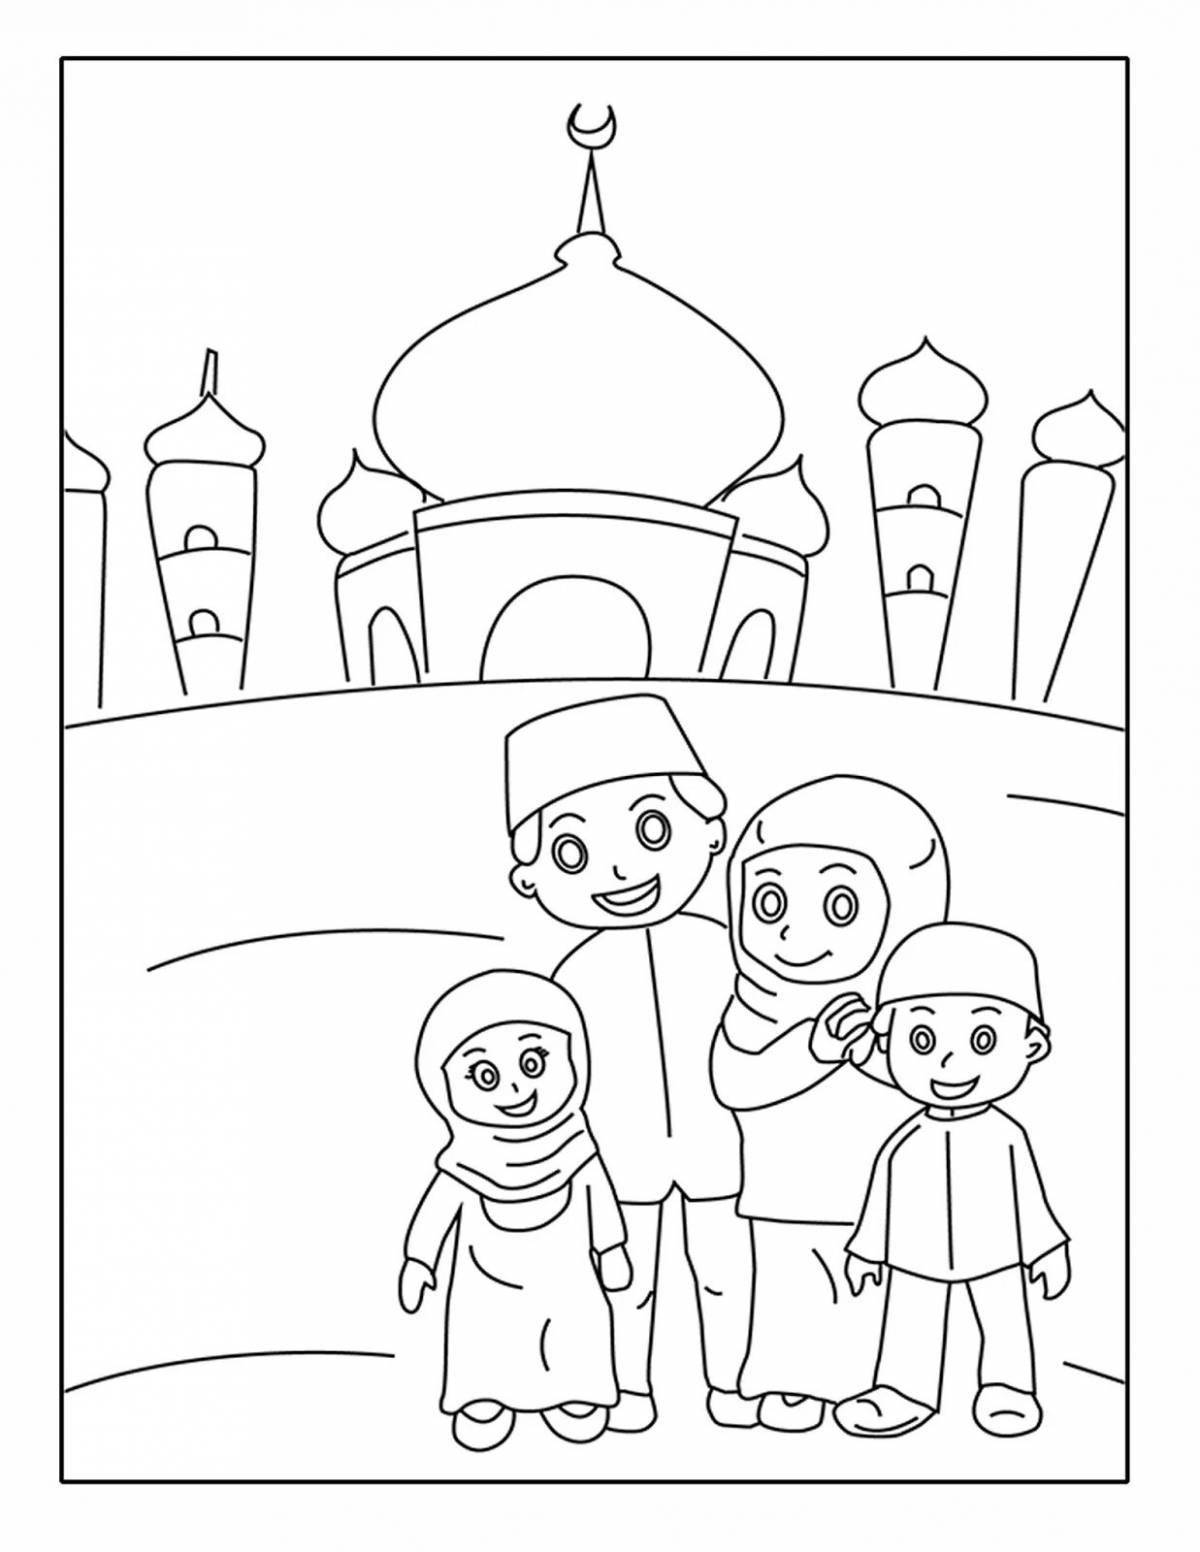 Awesome Islam coloring book